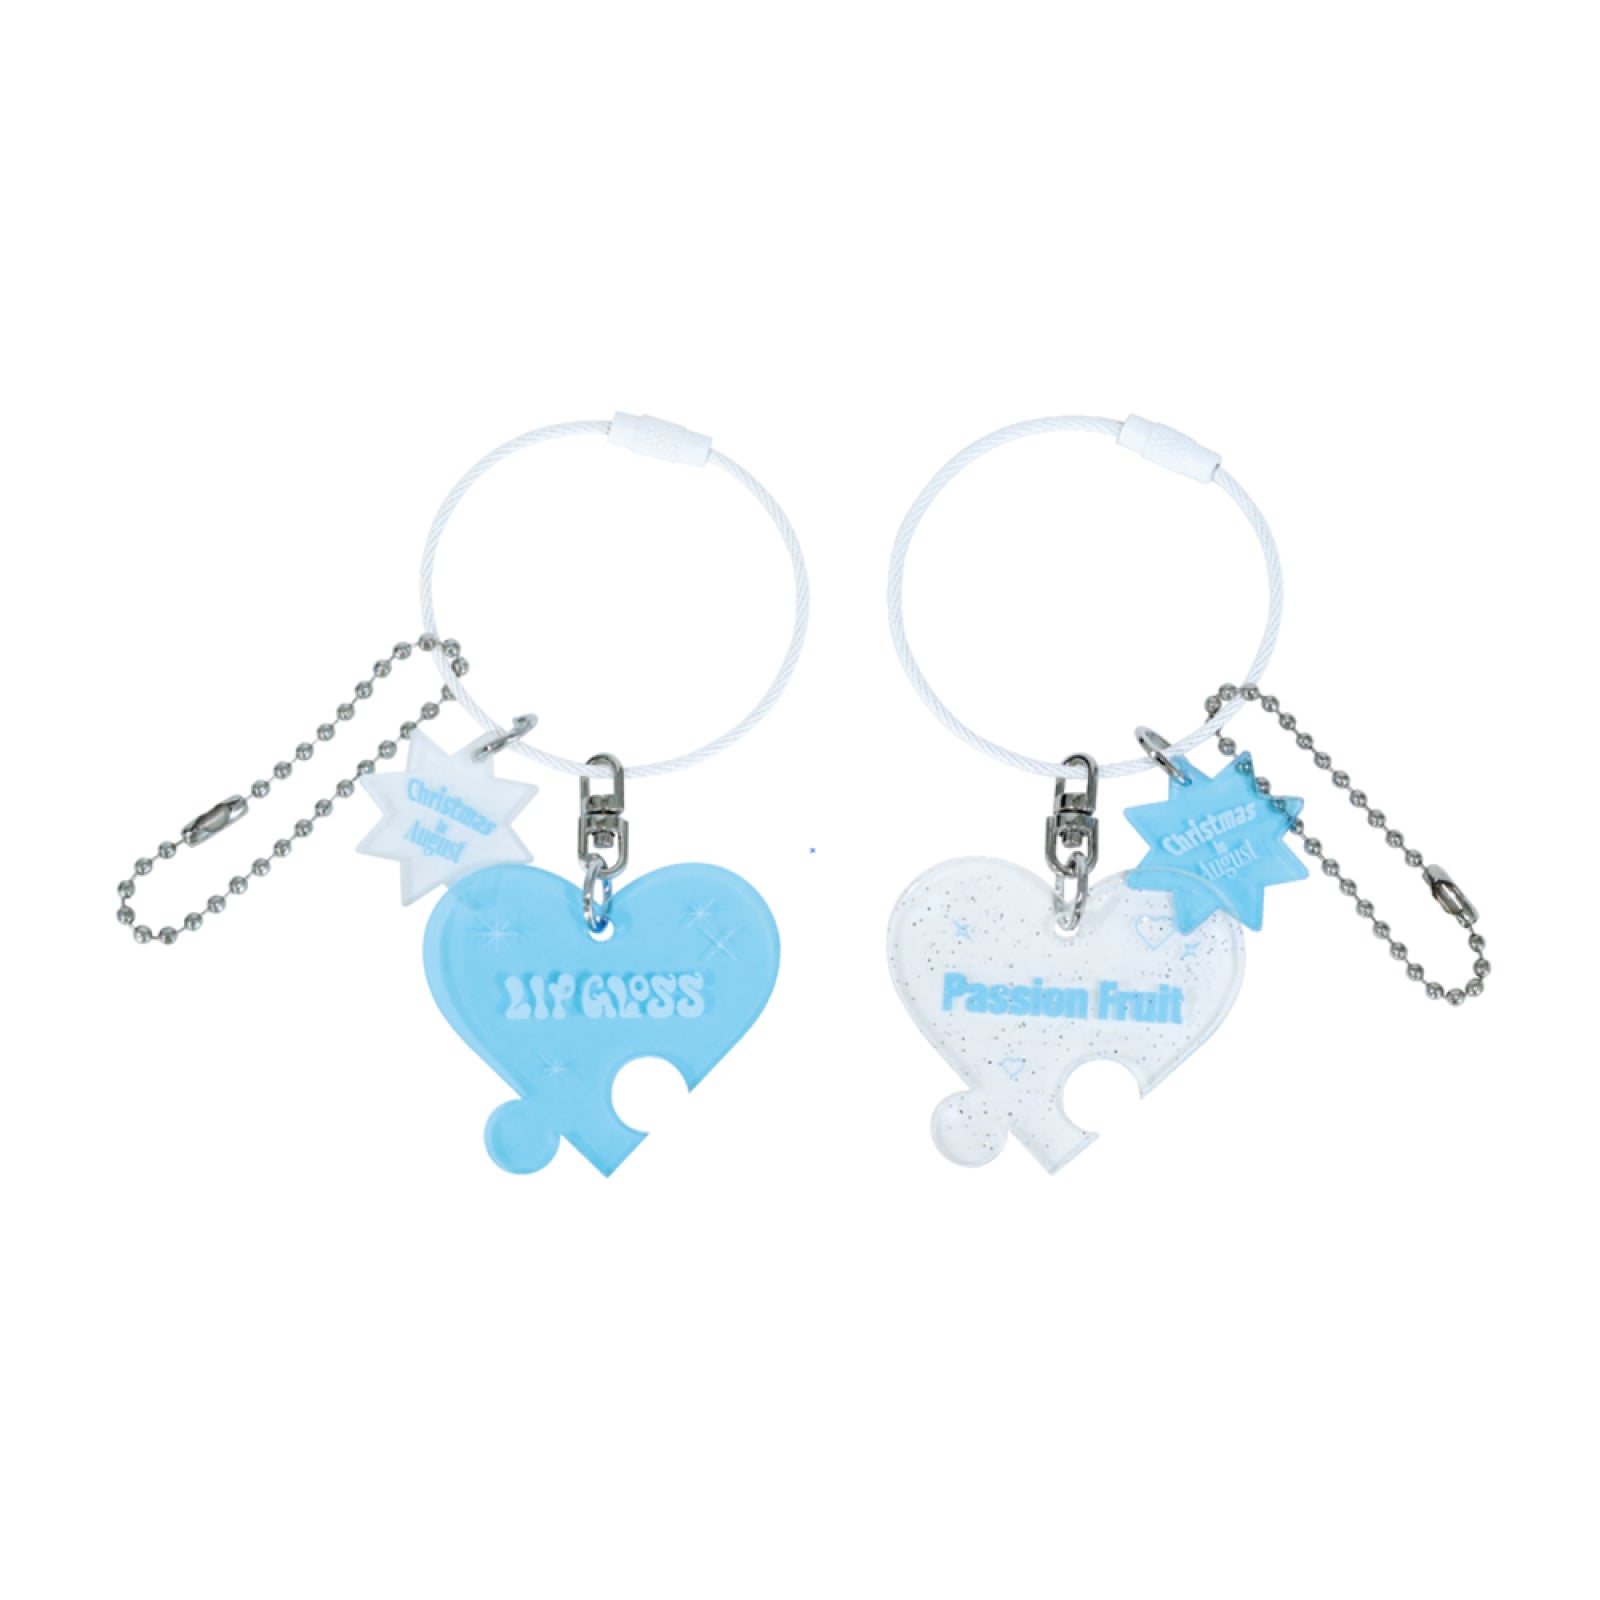 THE BOYZ - PHANTASY 2ND ALBUM OFFICIAL POP UP MD TRACK TITLE KEY RING - COKODIVE